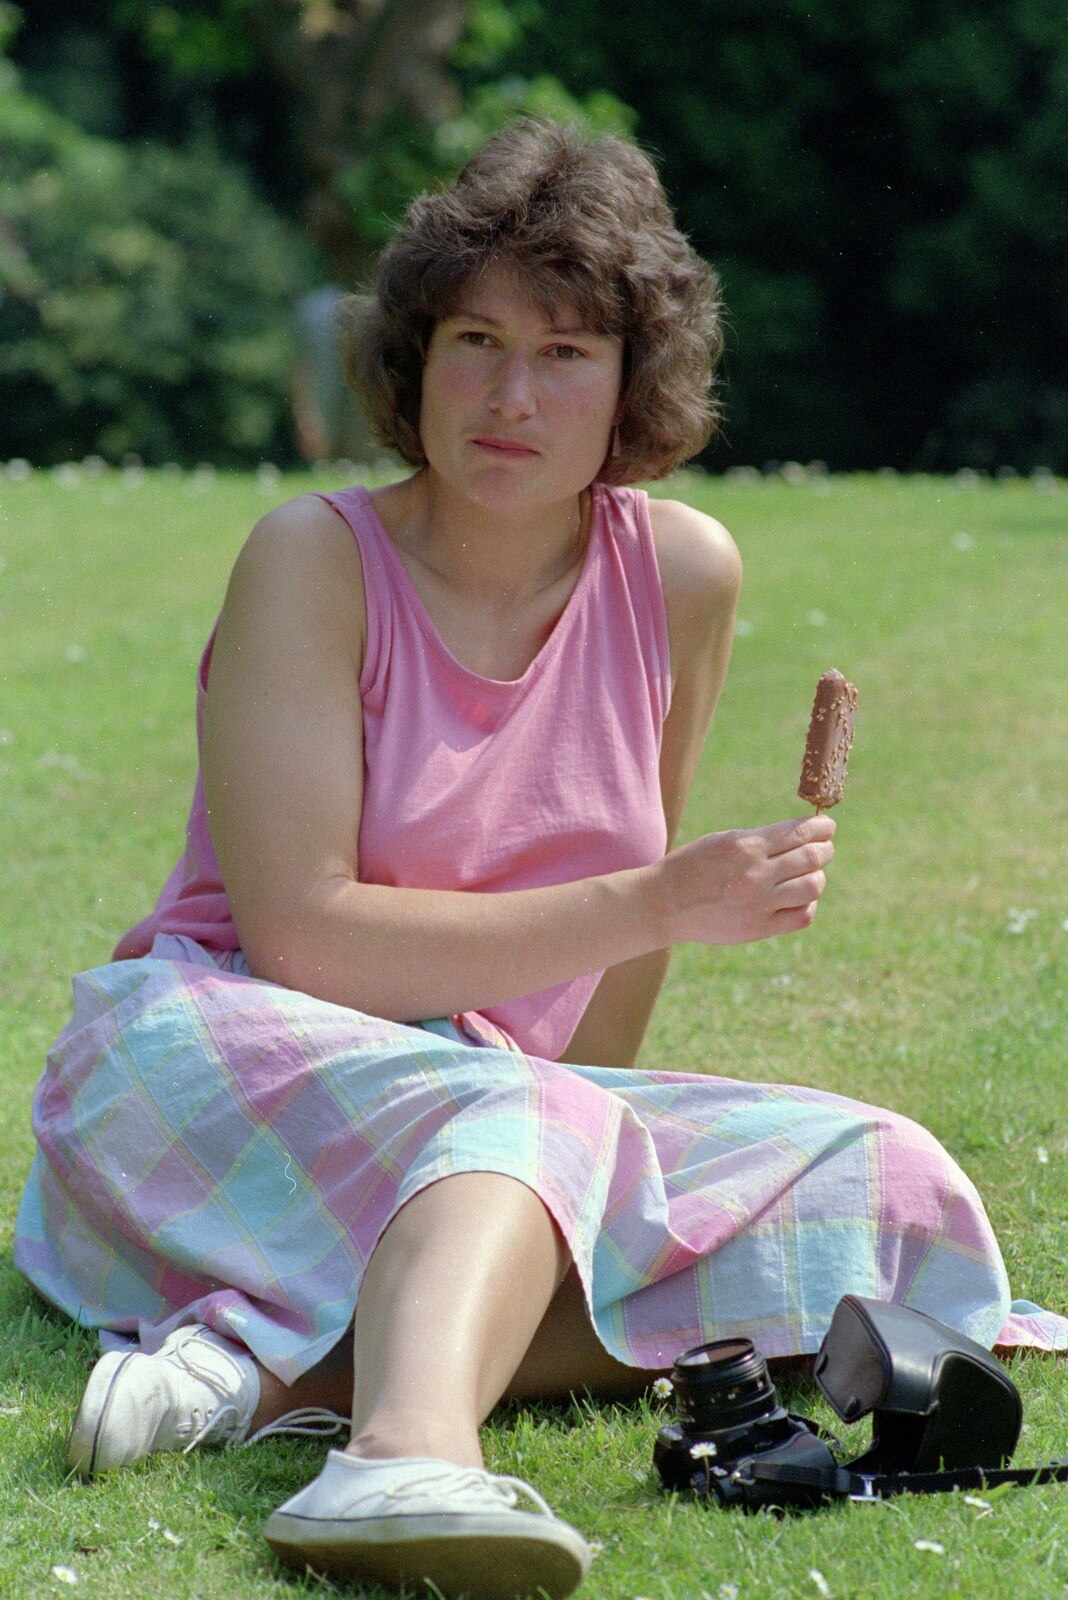 Angela on the ice-cream from Uni: Another Side of Student Life, Yelverton, Devon - 23rd June 1989